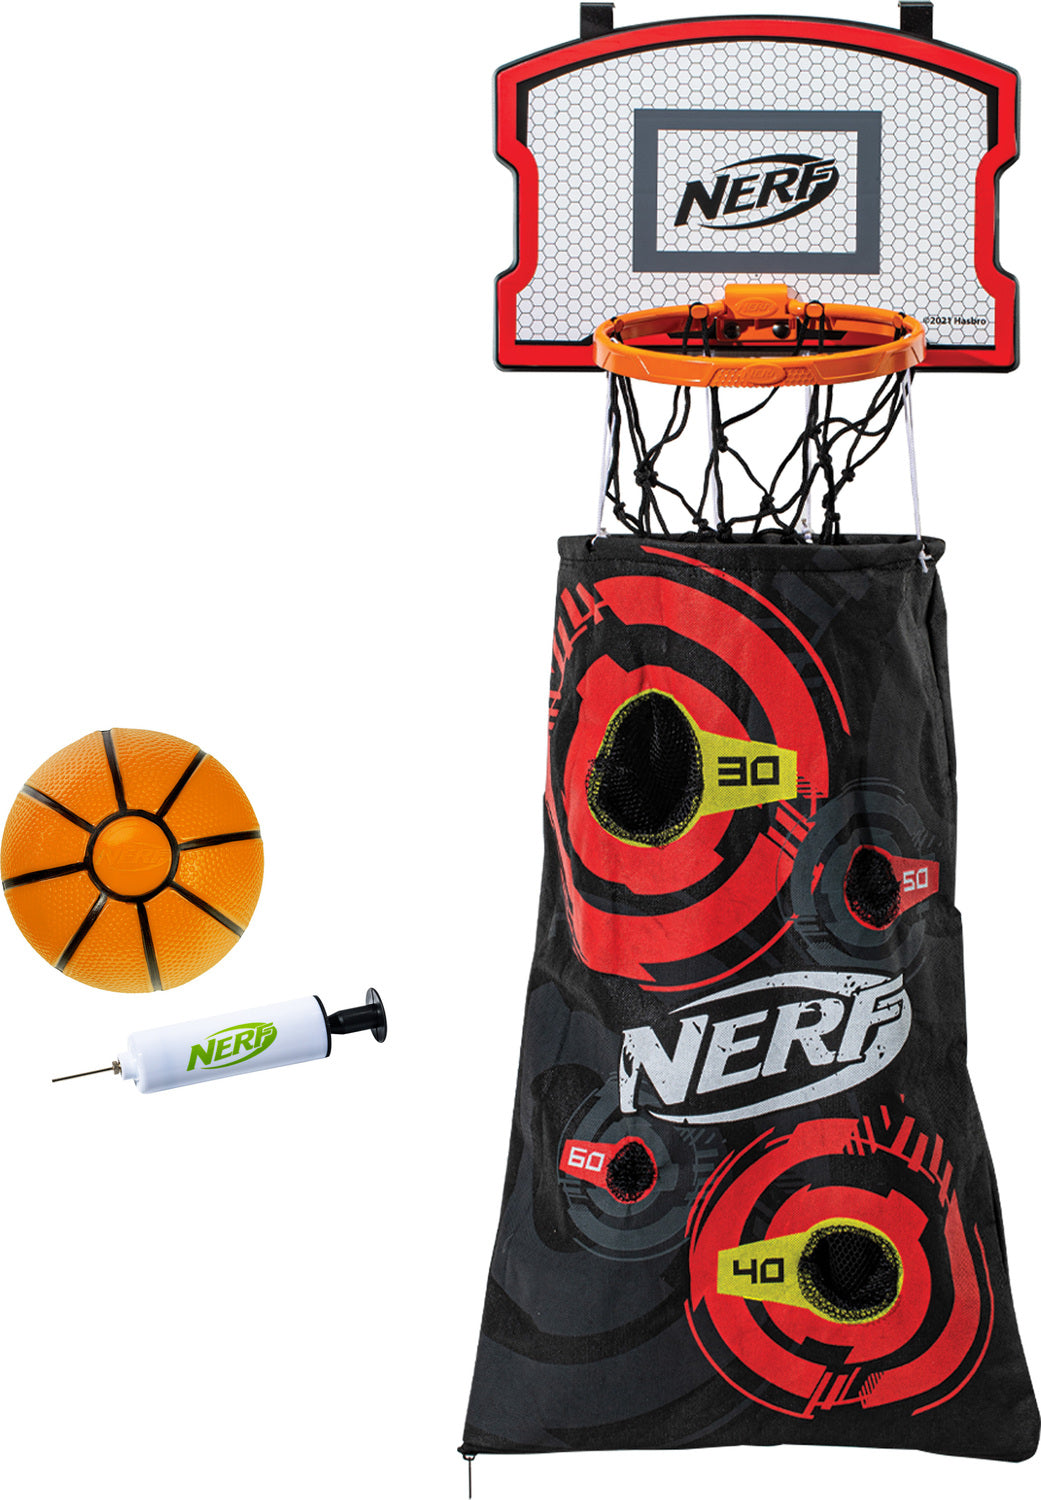 Nerf 3-In1 Laundry Lay Up